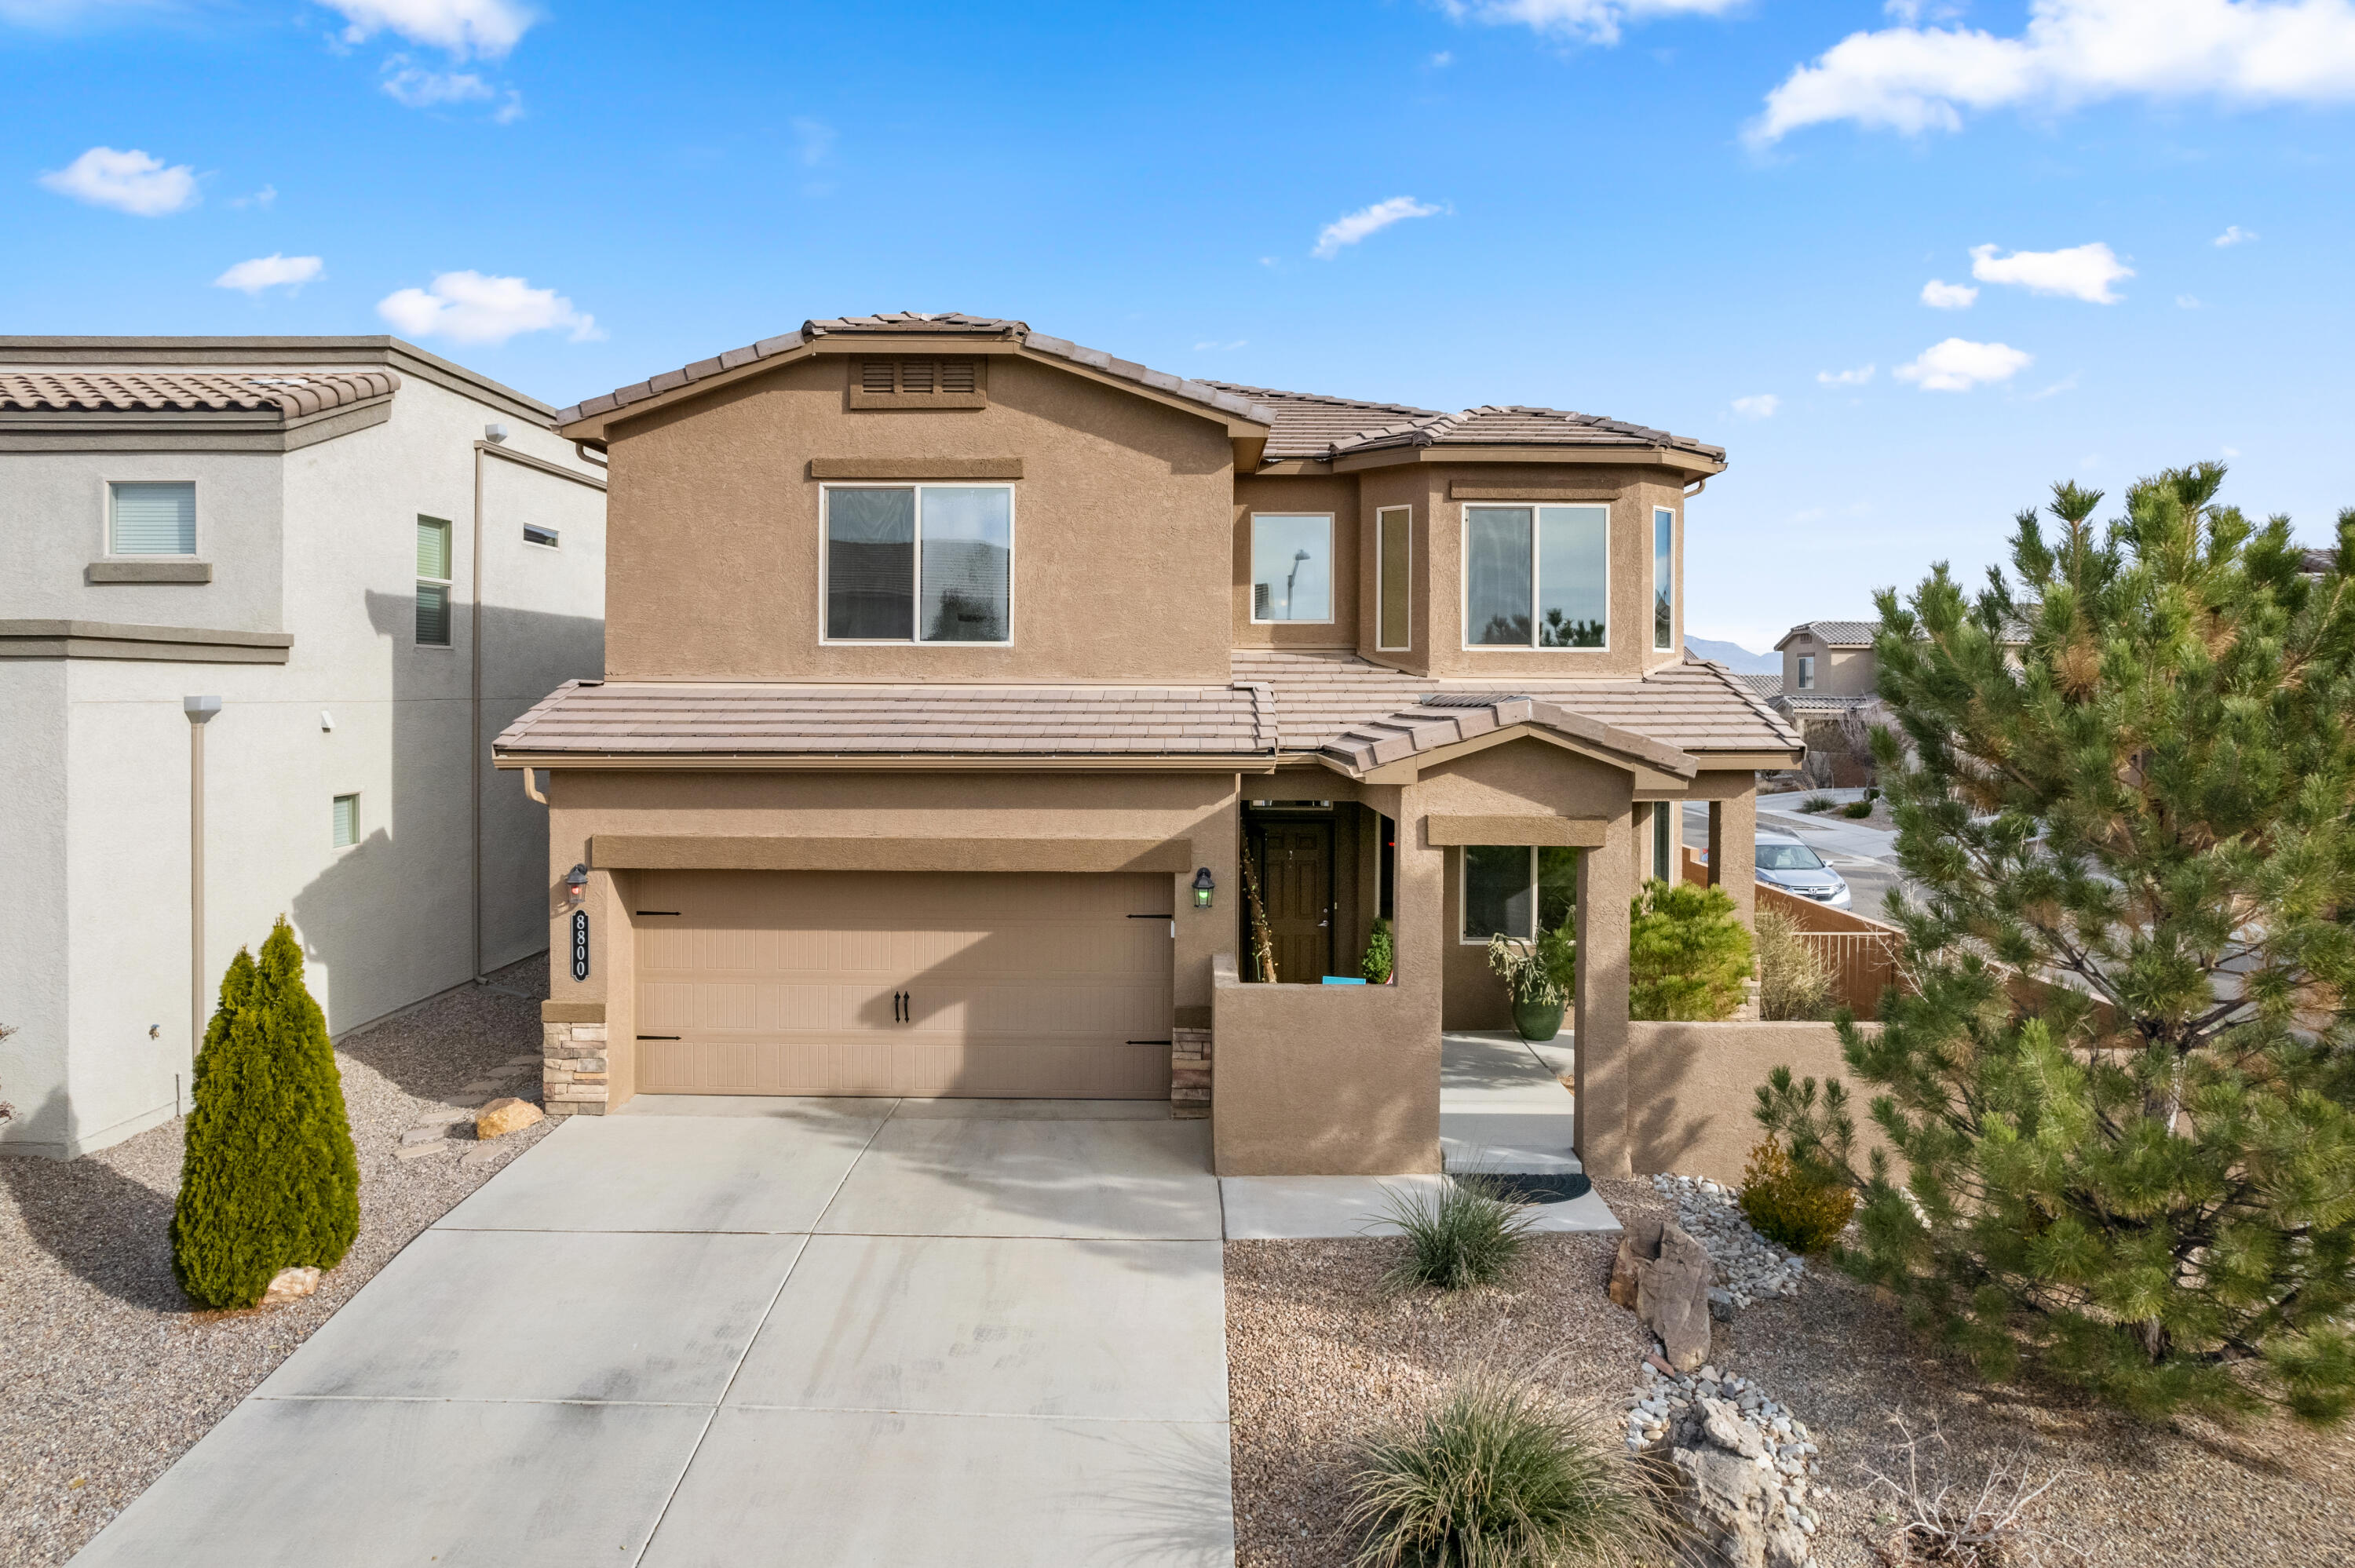 An Alluring 2-Story Home On A Corner Lot Located In The Quiet Tierra Vista Community at The Trails.This Gorgeous 2428 Sq Ft Home Yields 5 BDRMS & 3 Baths,2CG w/ Brand New Door Spring & Nylon Rollers,A Loft,Balcony w/ New Trex Flooring & More!Main Level Offers Bright & Spacious LR/DR Combo Perfect For Small Gathering,Followed By The Kitchen w/ Modern Cabinets,Granite Countertops,Stainless Steel Appliances & A Pantry.A Bedroom & Half Bath to Follow.Upstairs You Will Find The Loft That Leads to the Balcony w/ Excellent Views of The Sandia & Manzano Mountains,The Master Bedroom w/ Walk-In Closet,Ensuite Bathroom w/ Shower & Double Sink.Three More Rooms & A Full Bath to Follow.Outdoors Is Barbeque Ready w/ Walled Backyard & Covered Patio w/ New Acrylic Flooring.Close to Schools, Park &Shopping!